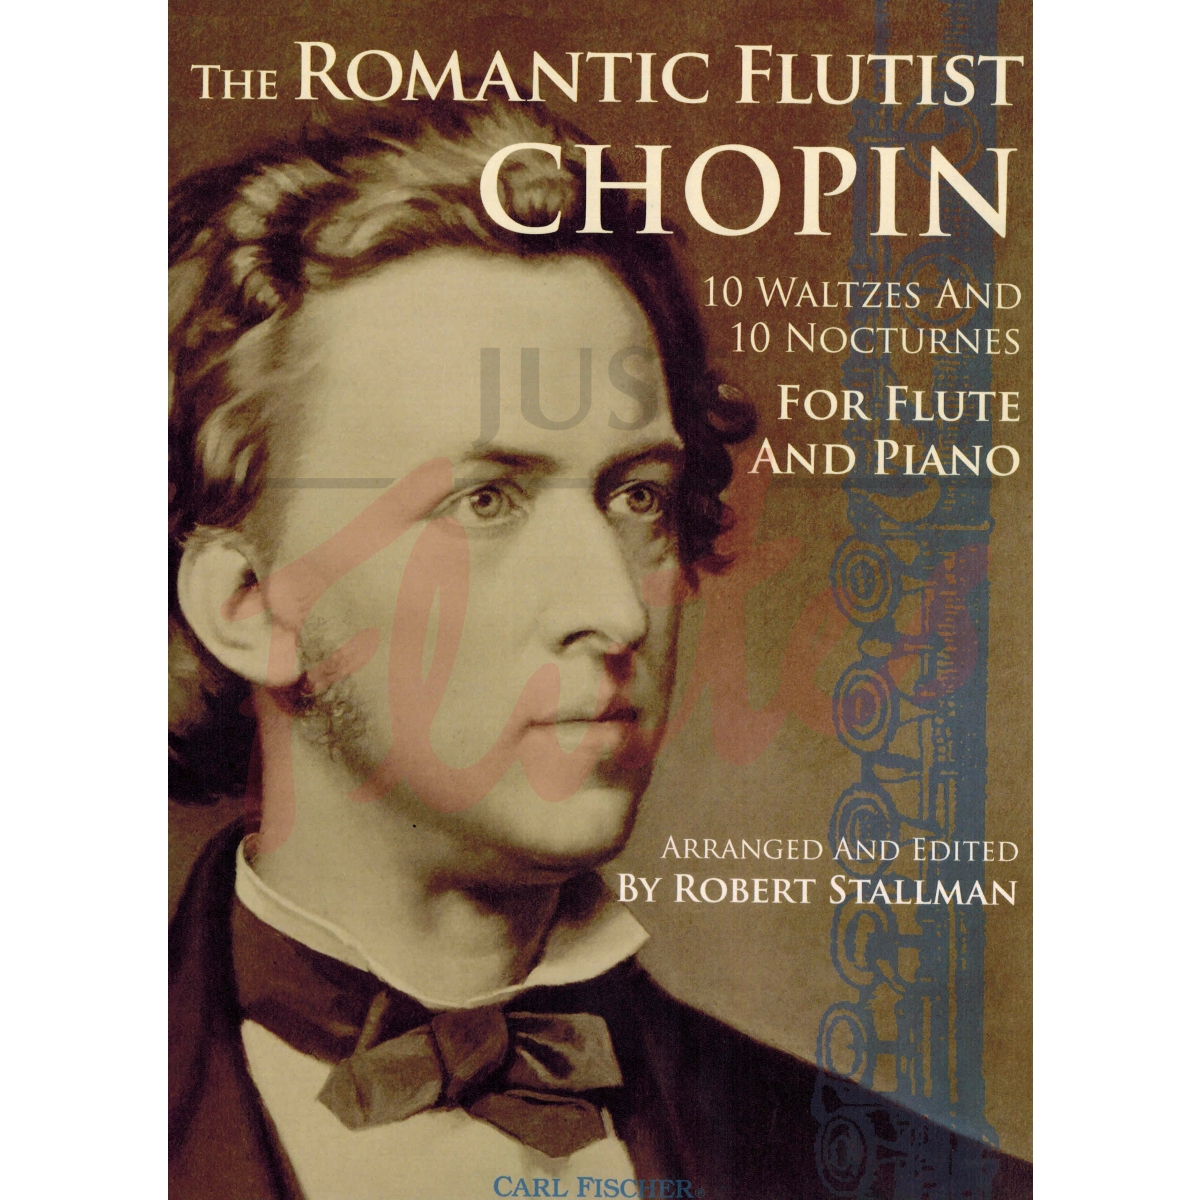 The Romantic Flutist - Chopin: 10 Waltzes and 10 Nocturnes for Flute and Piano